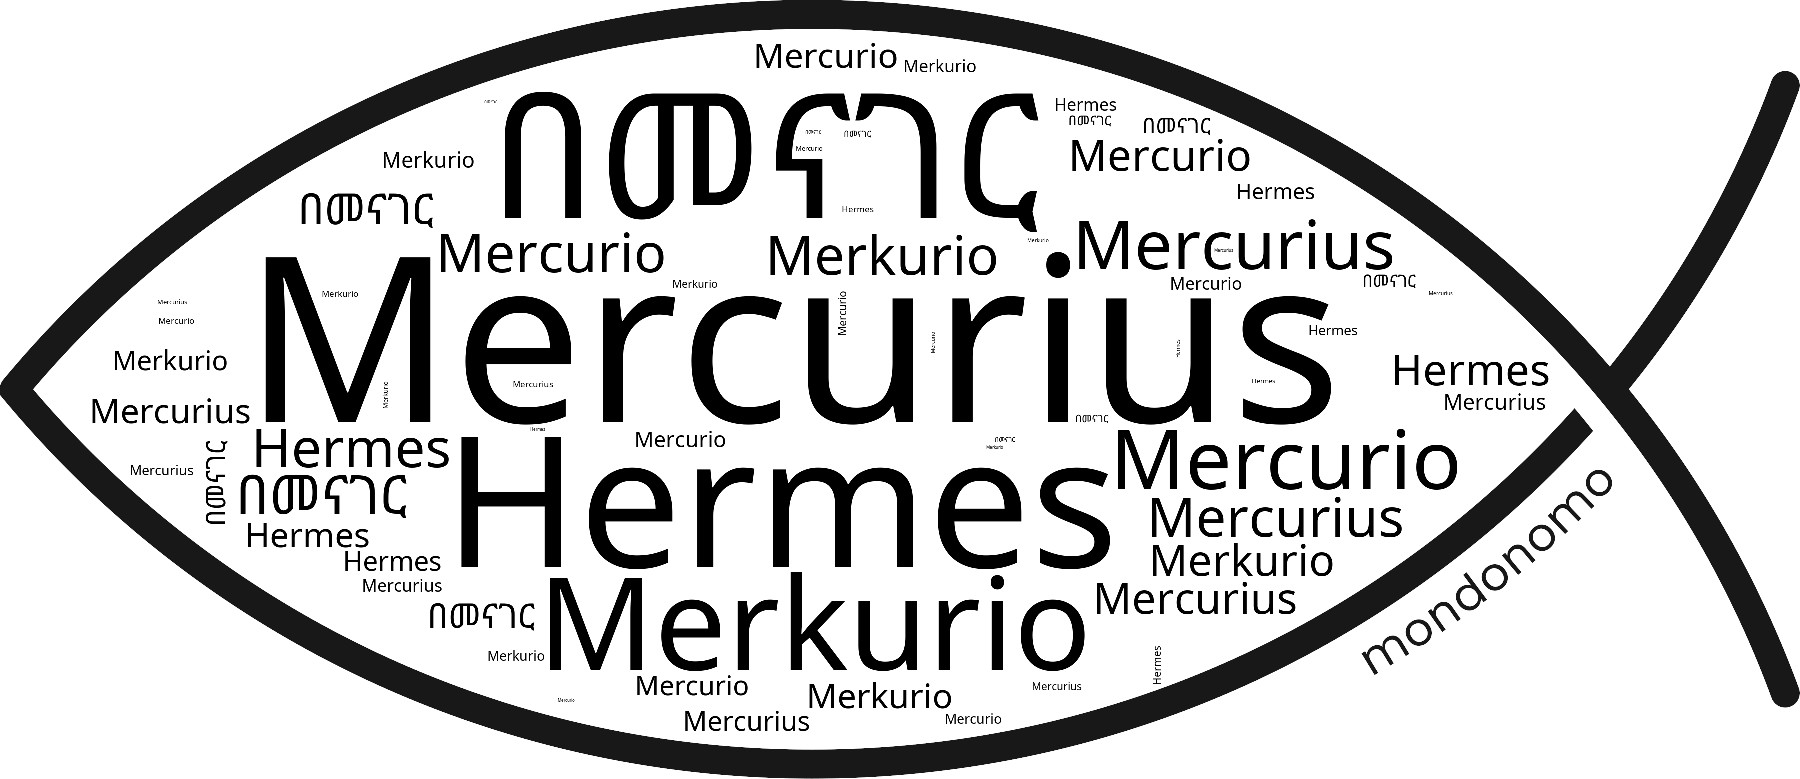 Name Mercurius in the world's Bibles